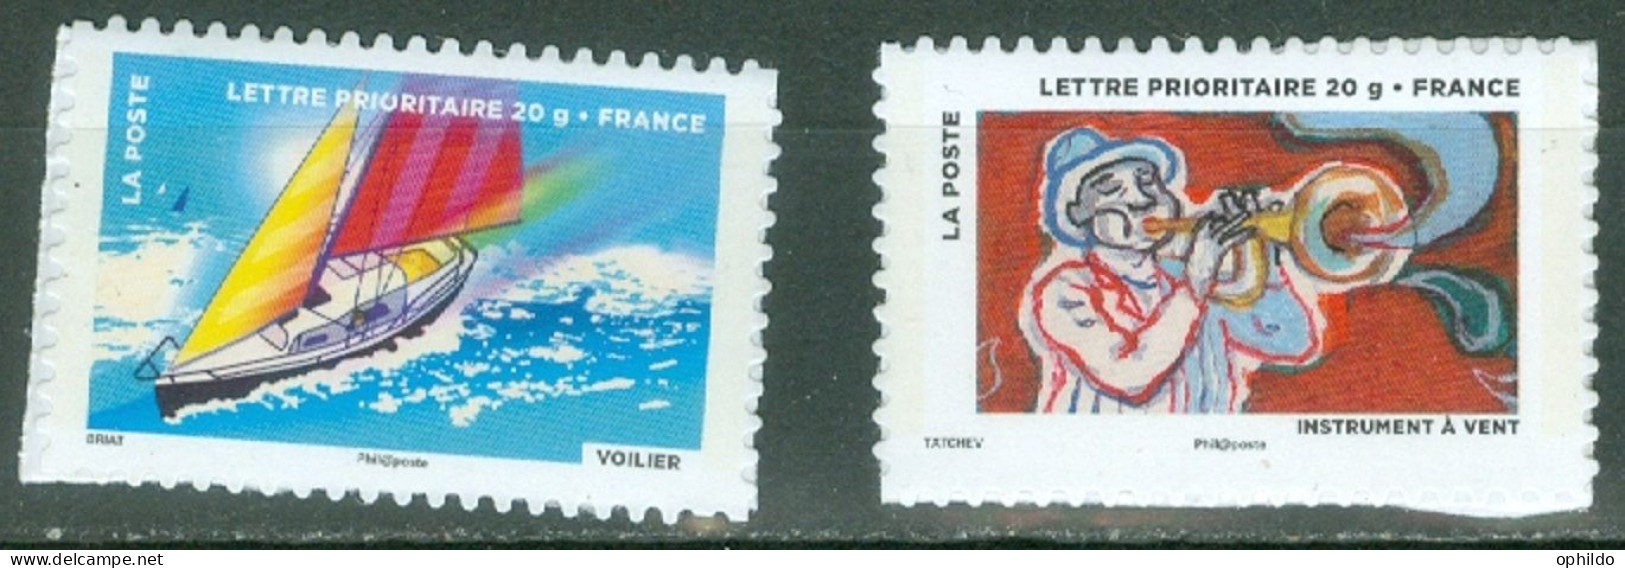 France 894a Et 895a * * TB - Unused Stamps